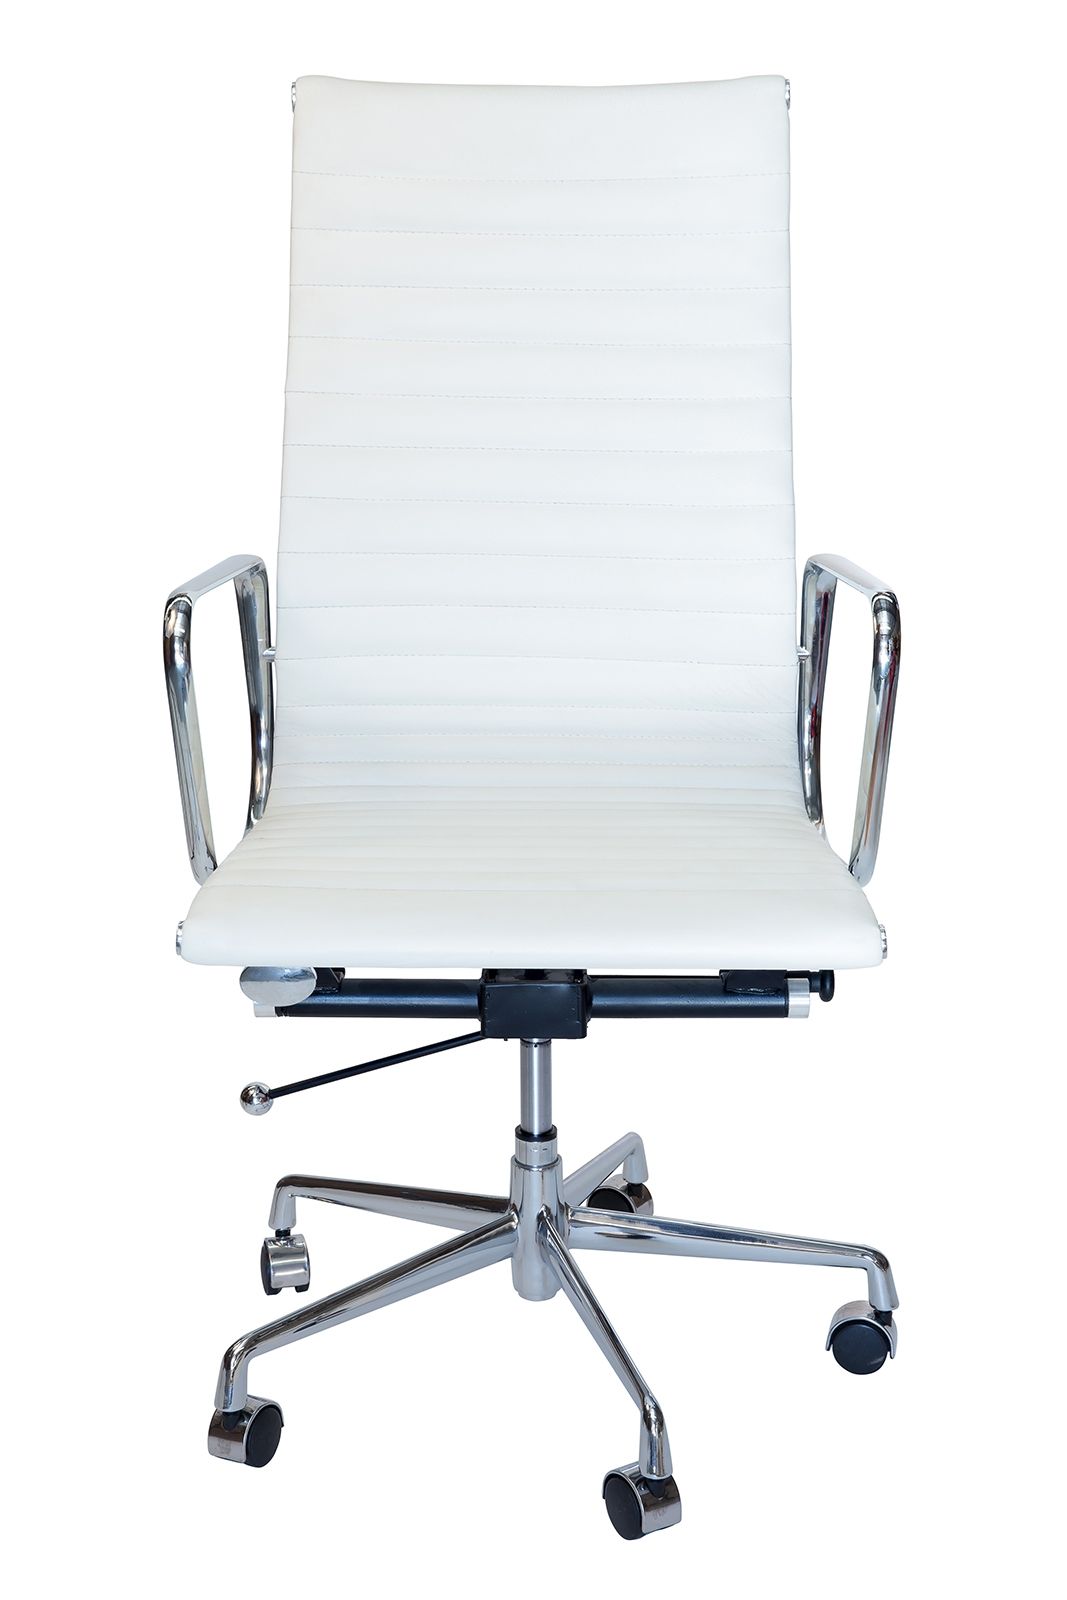 Replica Eames High Back Ribbed Leather Executive Desk / Office Chair | White